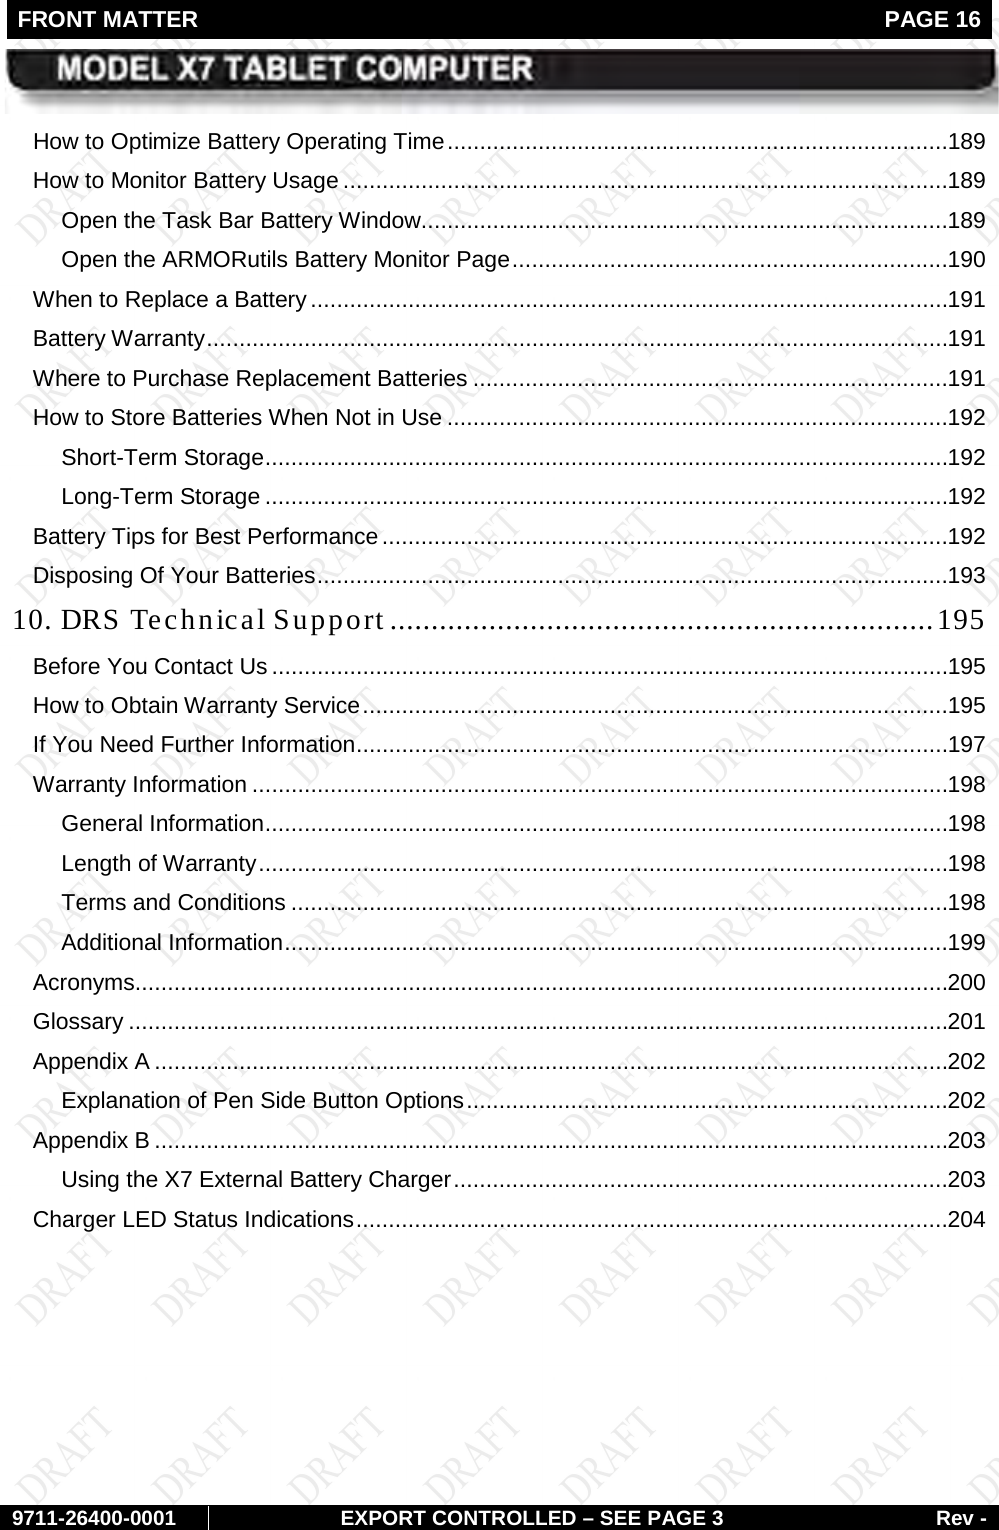 FRONT MATTER   PAGE 16        9711-26400-0001 EXPORT CONTROLLED – SEE PAGE 3 Rev - How to Optimize Battery Operating Time ............................................................................. 189 How to Monitor Battery Usage ............................................................................................. 189 Open the Task Bar Battery Window ................................................................................. 189 Open the ARMORutils Battery Monitor Page ................................................................... 190 When to Replace a Battery .................................................................................................. 191 Battery Warranty .................................................................................................................. 191 Where to Purchase Replacement Batteries ......................................................................... 191 How to Store Batteries When Not in Use ............................................................................. 192 Short-Term Storage ......................................................................................................... 192 Long-Term Storage ......................................................................................................... 192 Battery Tips for Best Performance ....................................................................................... 192 Disposing Of Your Batteries ................................................................................................. 193 10. DRS Technical Support .................................................................. 195 Before You Contact Us ........................................................................................................ 195 How to Obtain Warranty Service .......................................................................................... 195 If You Need Further Information ........................................................................................... 197 Warranty Information ........................................................................................................... 198 General Information ......................................................................................................... 198 Length of Warranty .......................................................................................................... 198 Terms and Conditions ..................................................................................................... 198 Additional Information ...................................................................................................... 199 Acronyms............................................................................................................................. 200 Glossary .............................................................................................................................. 201 Appendix A .......................................................................................................................... 202 Explanation of Pen Side Button Options .......................................................................... 202 Appendix B .......................................................................................................................... 203 Using the X7 External Battery Charger ............................................................................ 203 Charger LED Status Indications ........................................................................................... 204    